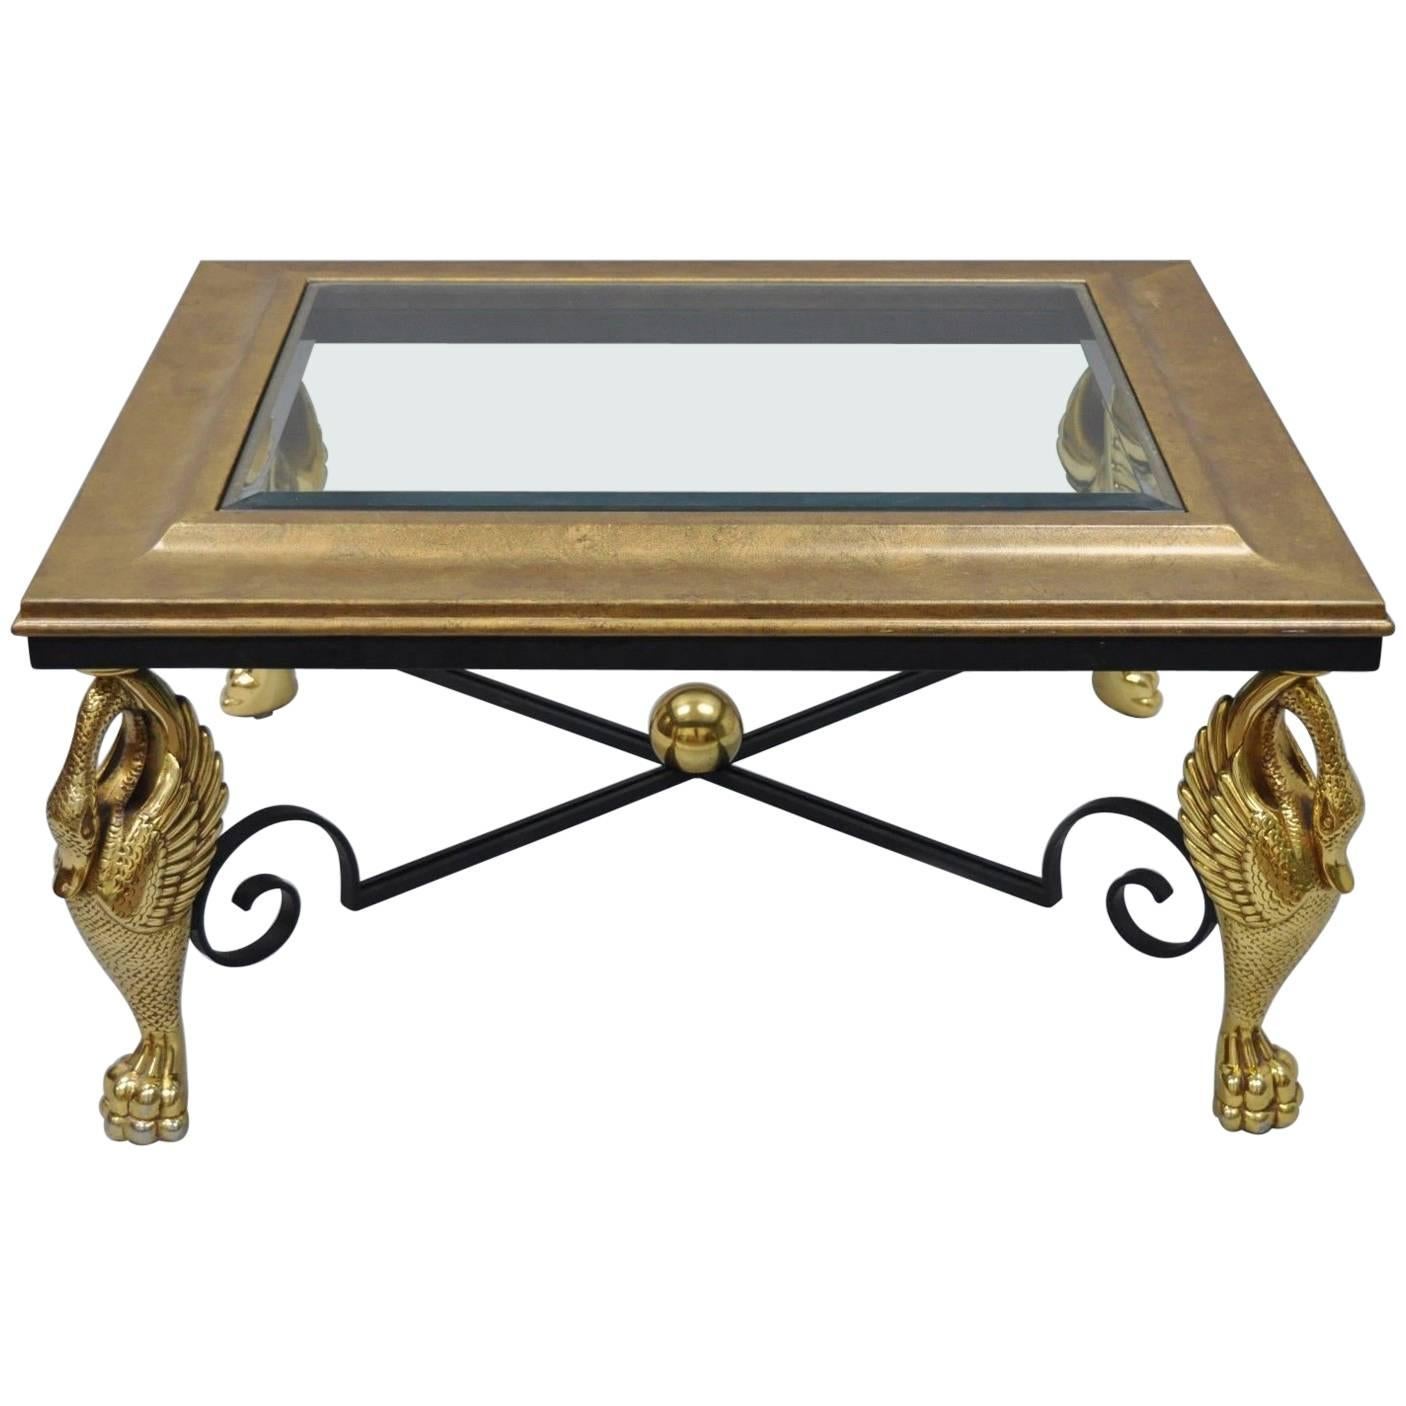 Regency Style Swan Base Rectangular Coffee Table Gold Metal Iron and Glass Top